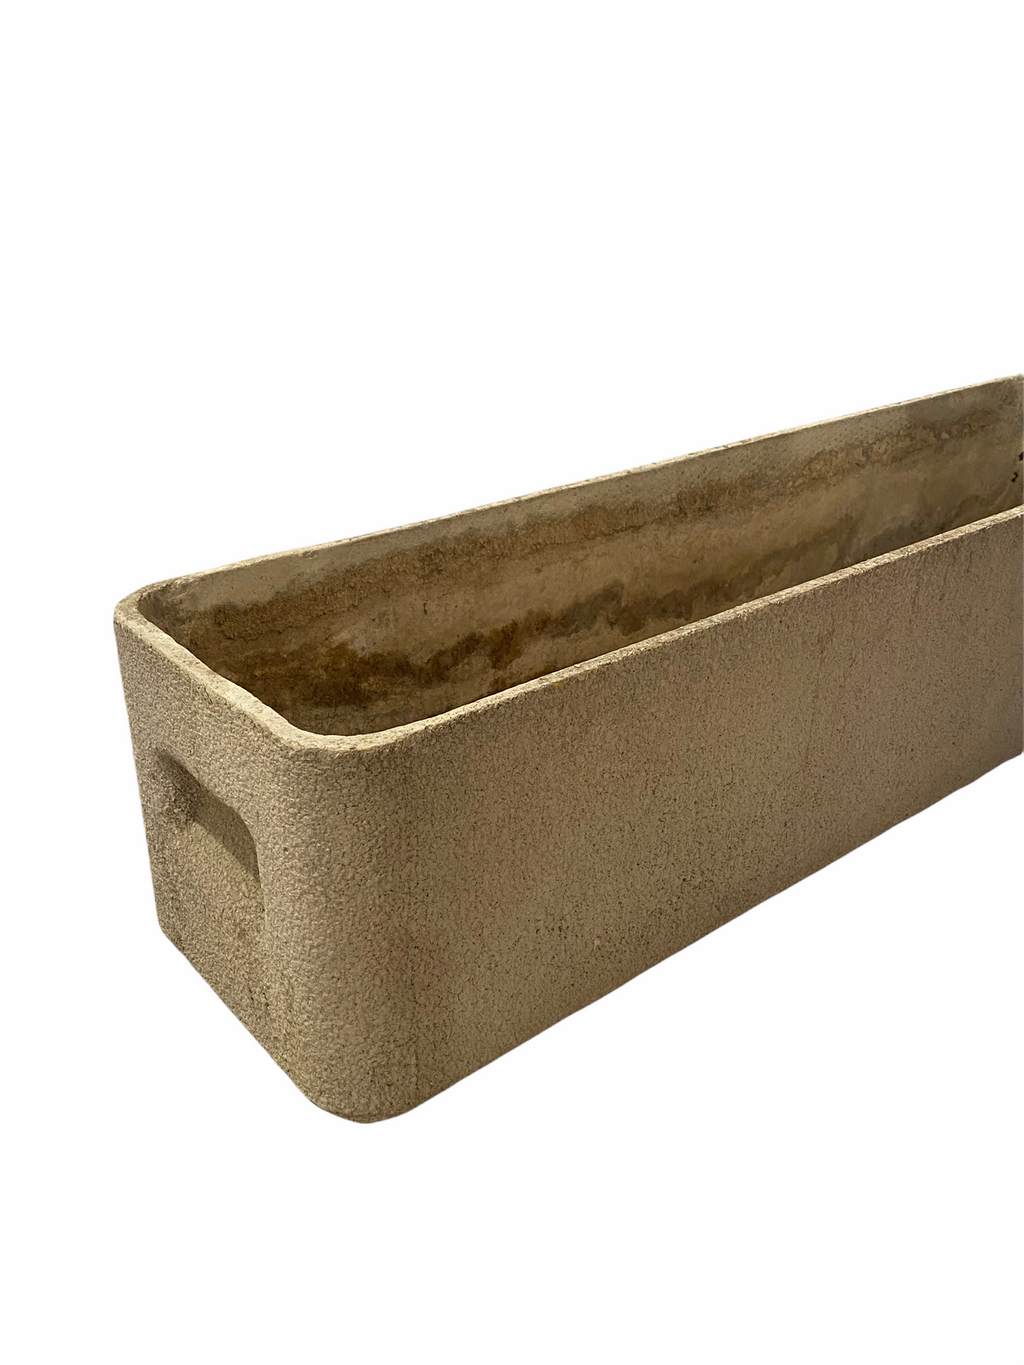 French Concrete Jardiniere (3 available)